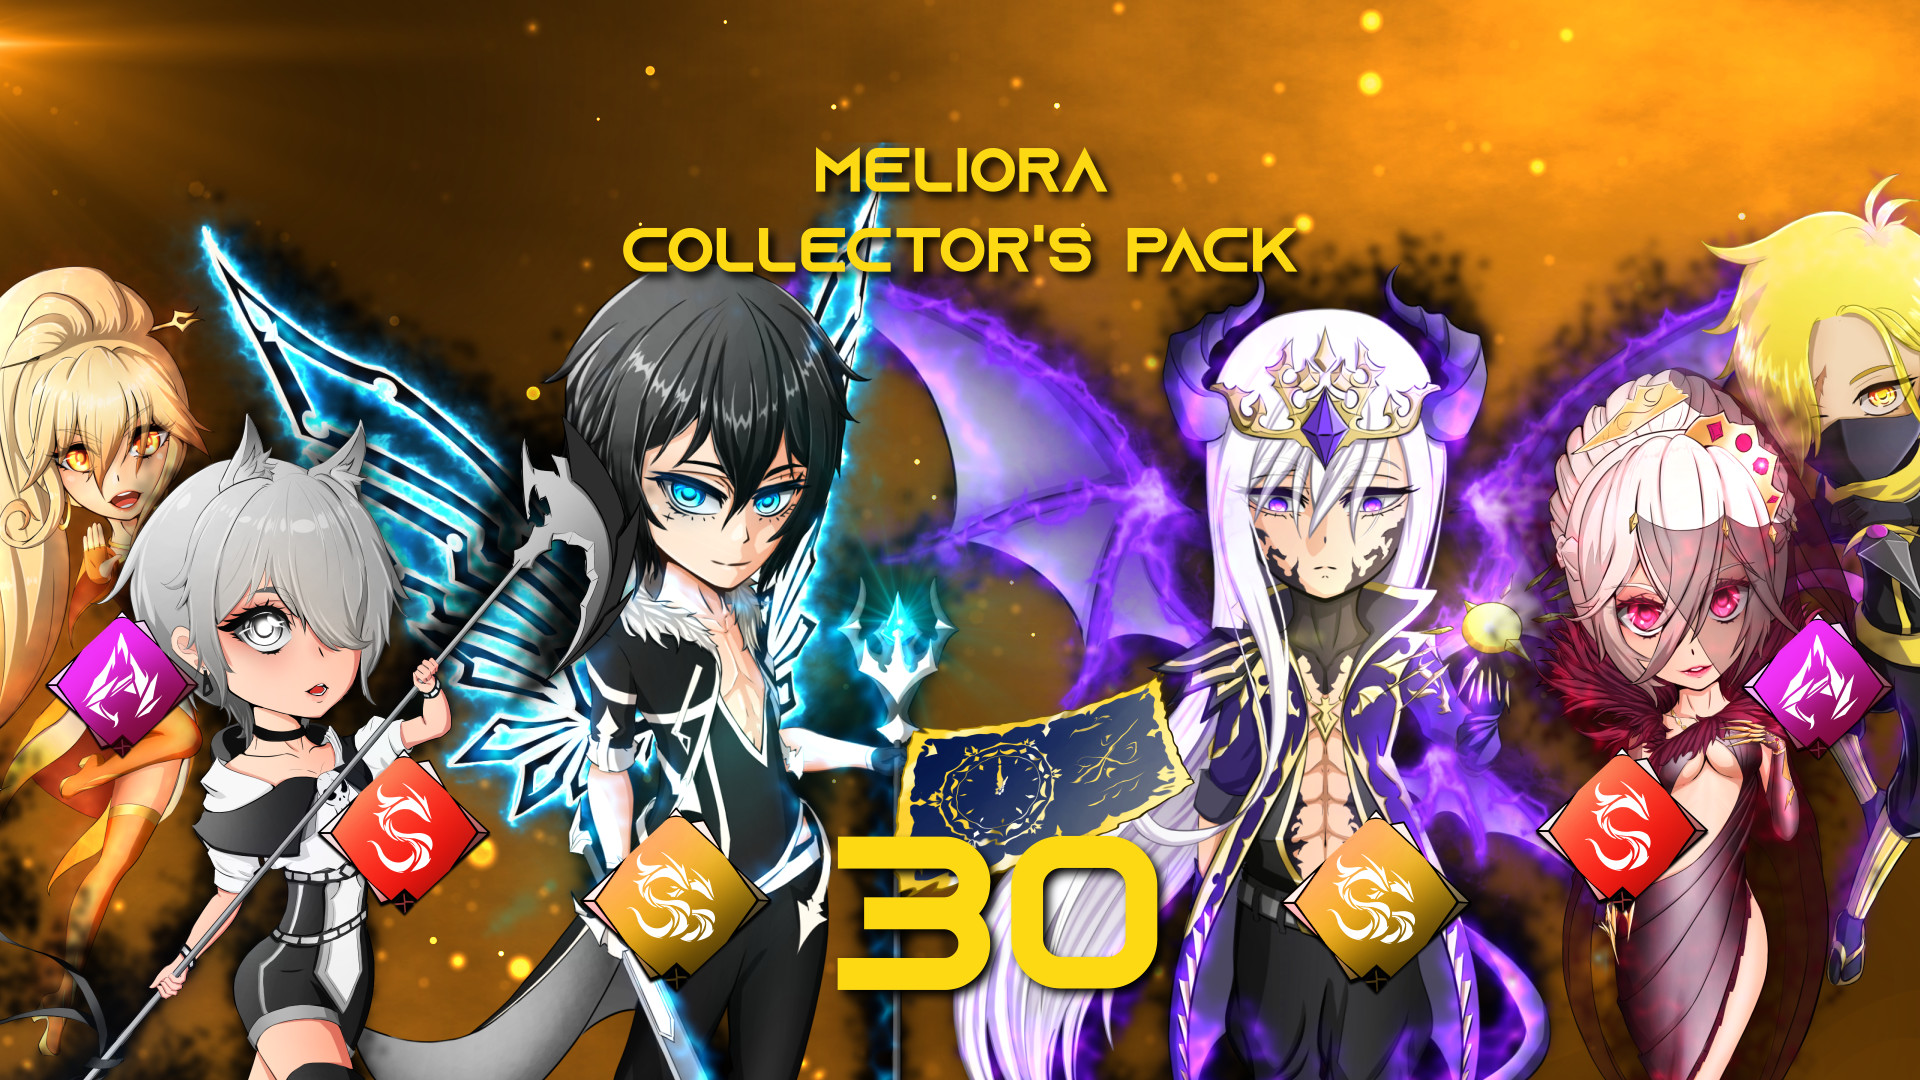 Meliora - Collector's Pack DLC Steam CD Key, 5.03 usd